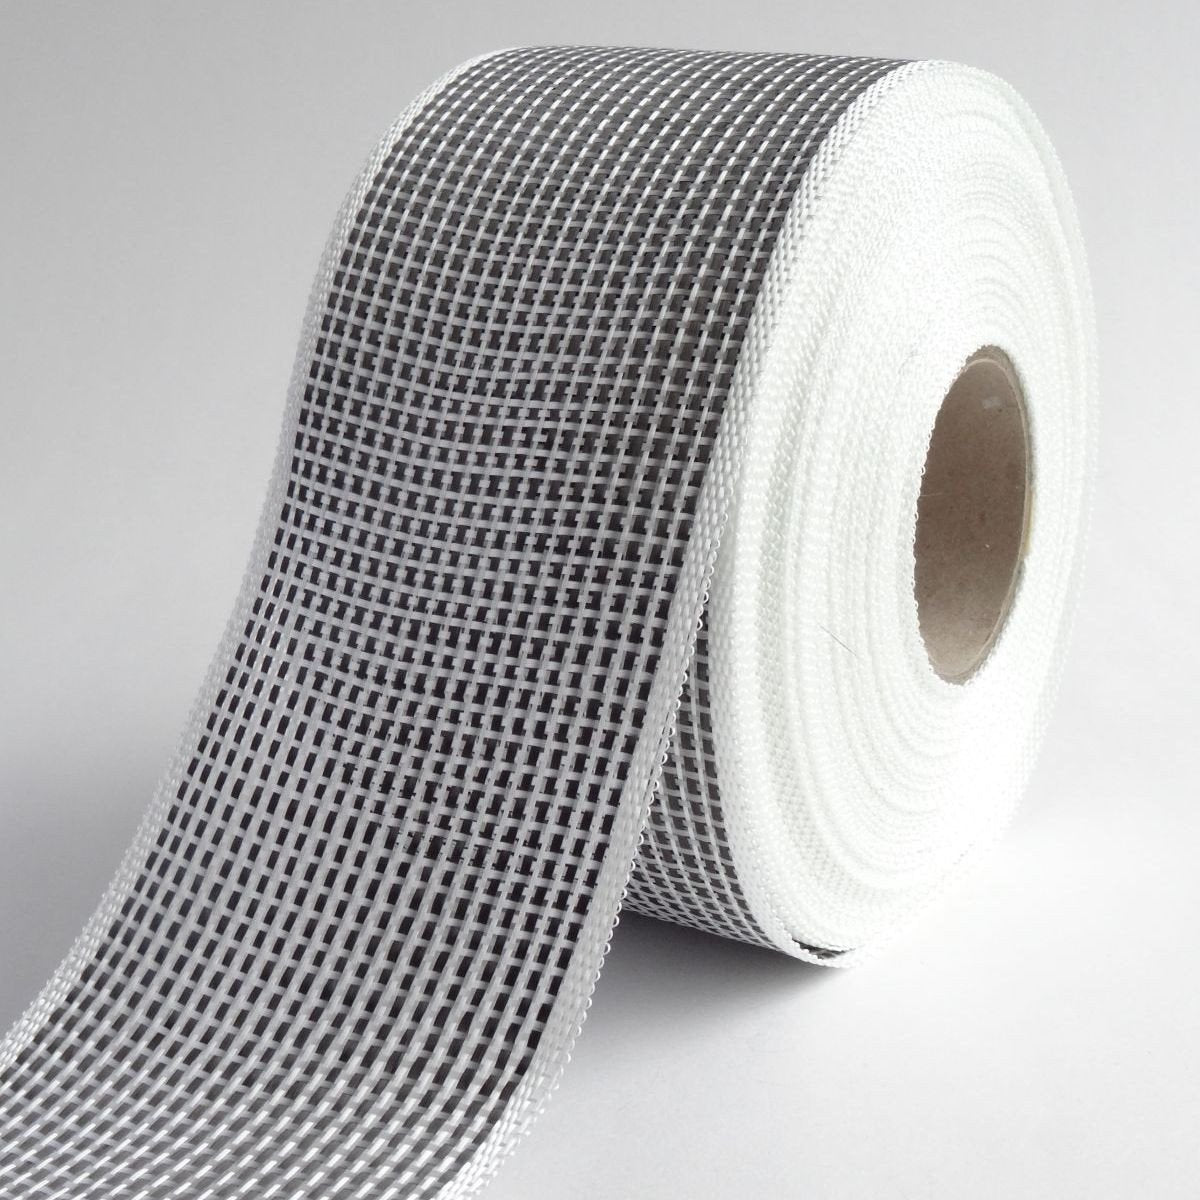 Hybrid Carbon FABRIC woven Tapes with 2mm thickness, For